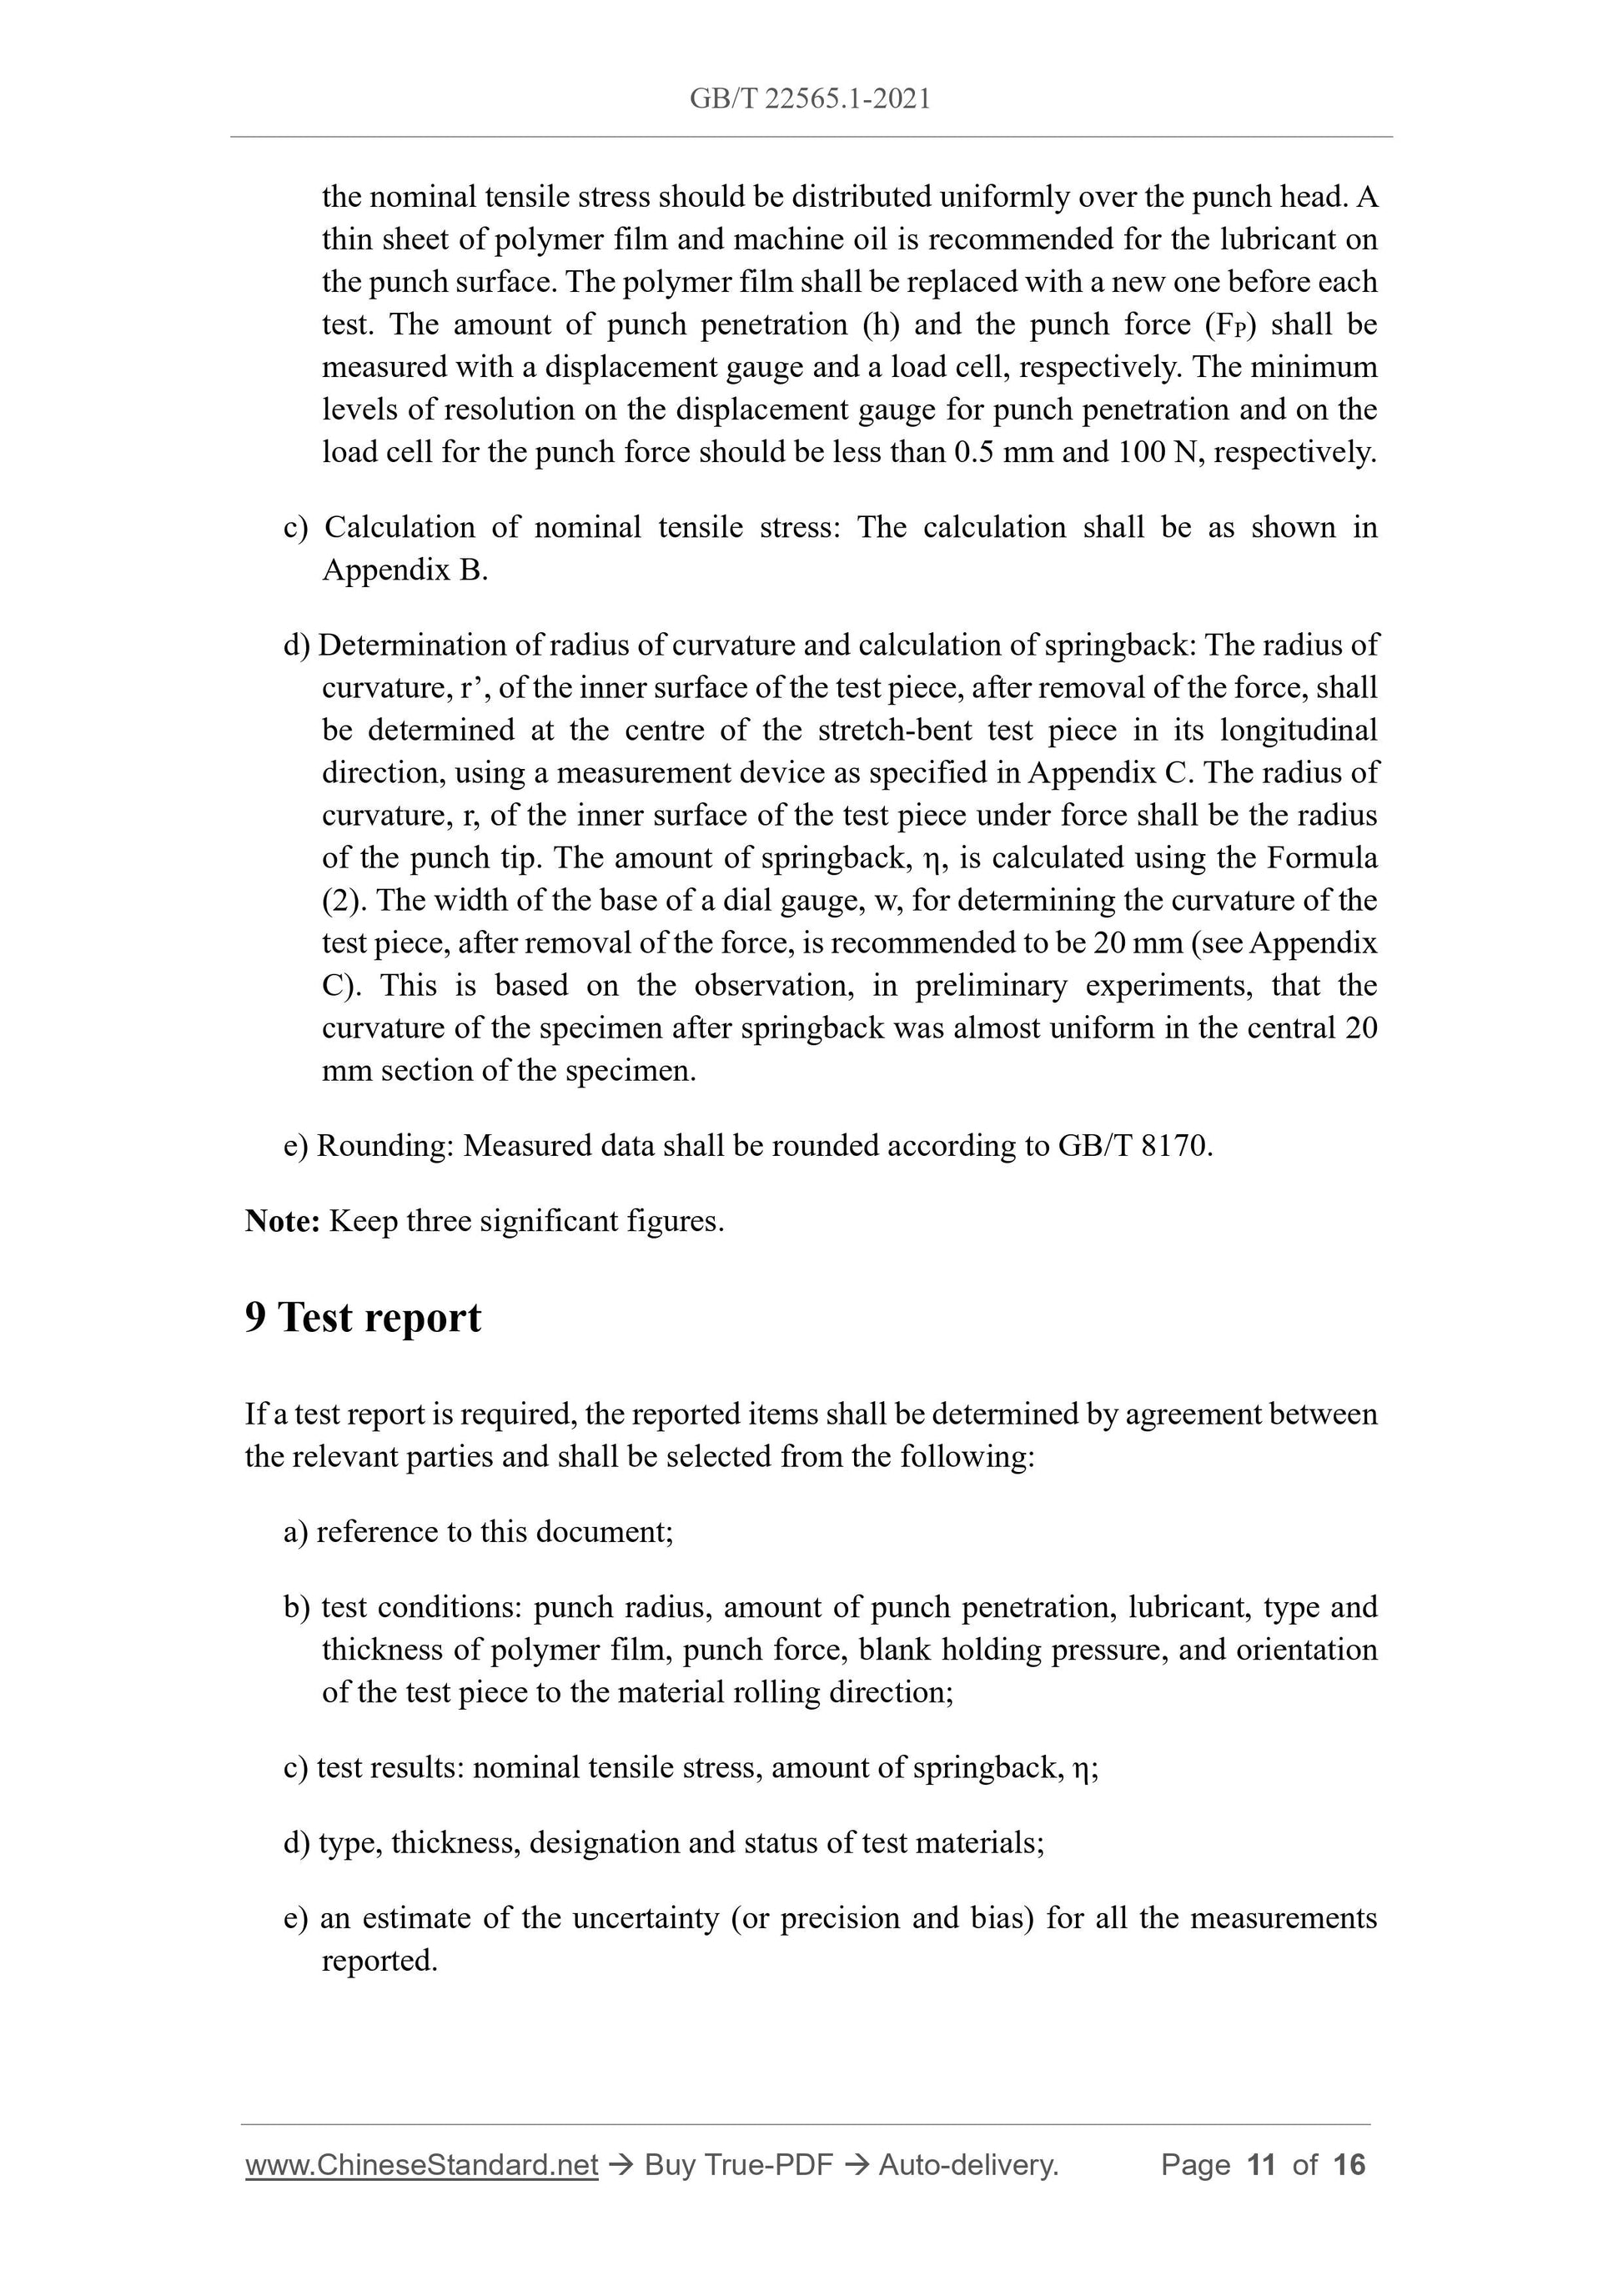 GB/T 22565.1-2021 Page 5